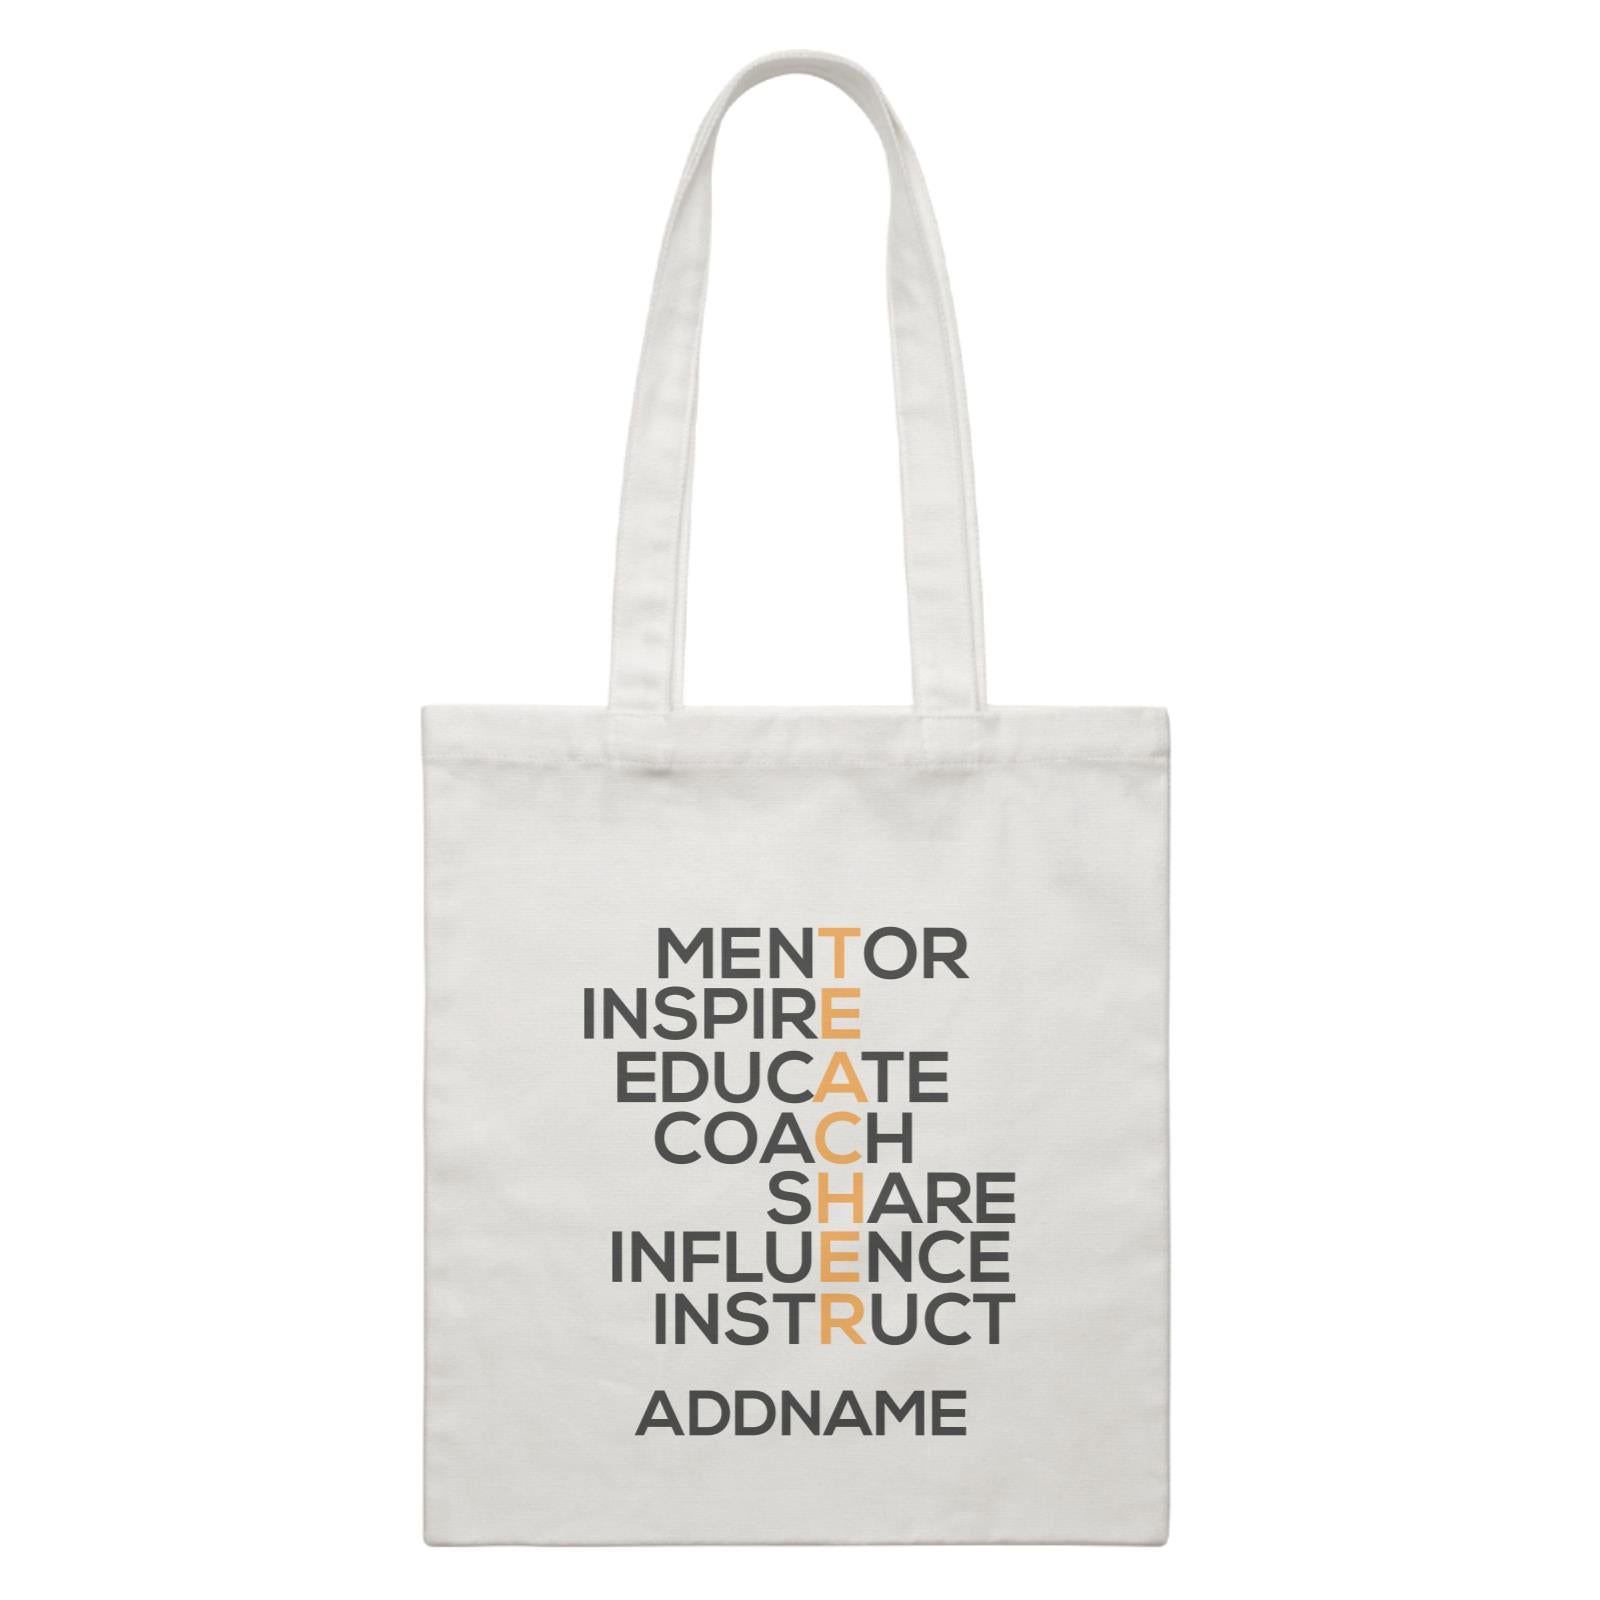 Teacher Quotes 2 Teacher Share Influence Instruct Addname White Canvas Bag